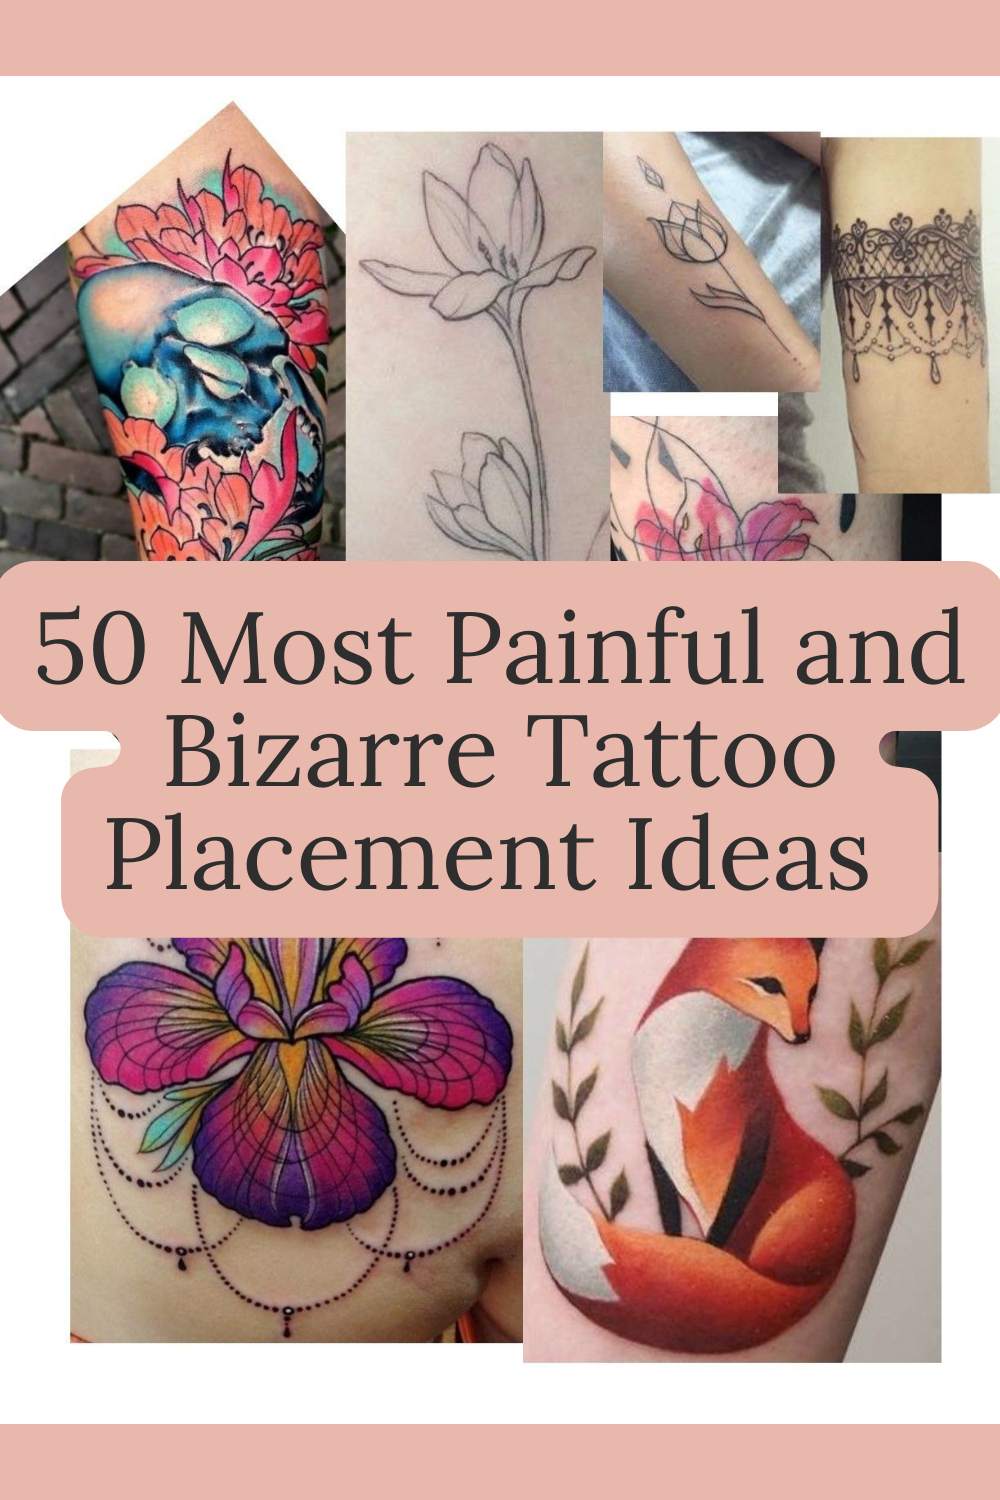 50 Most Painful and Bizarre Tattoo Placement Ideas - From Most Painful to Least Painful. Top Beauty Magazines